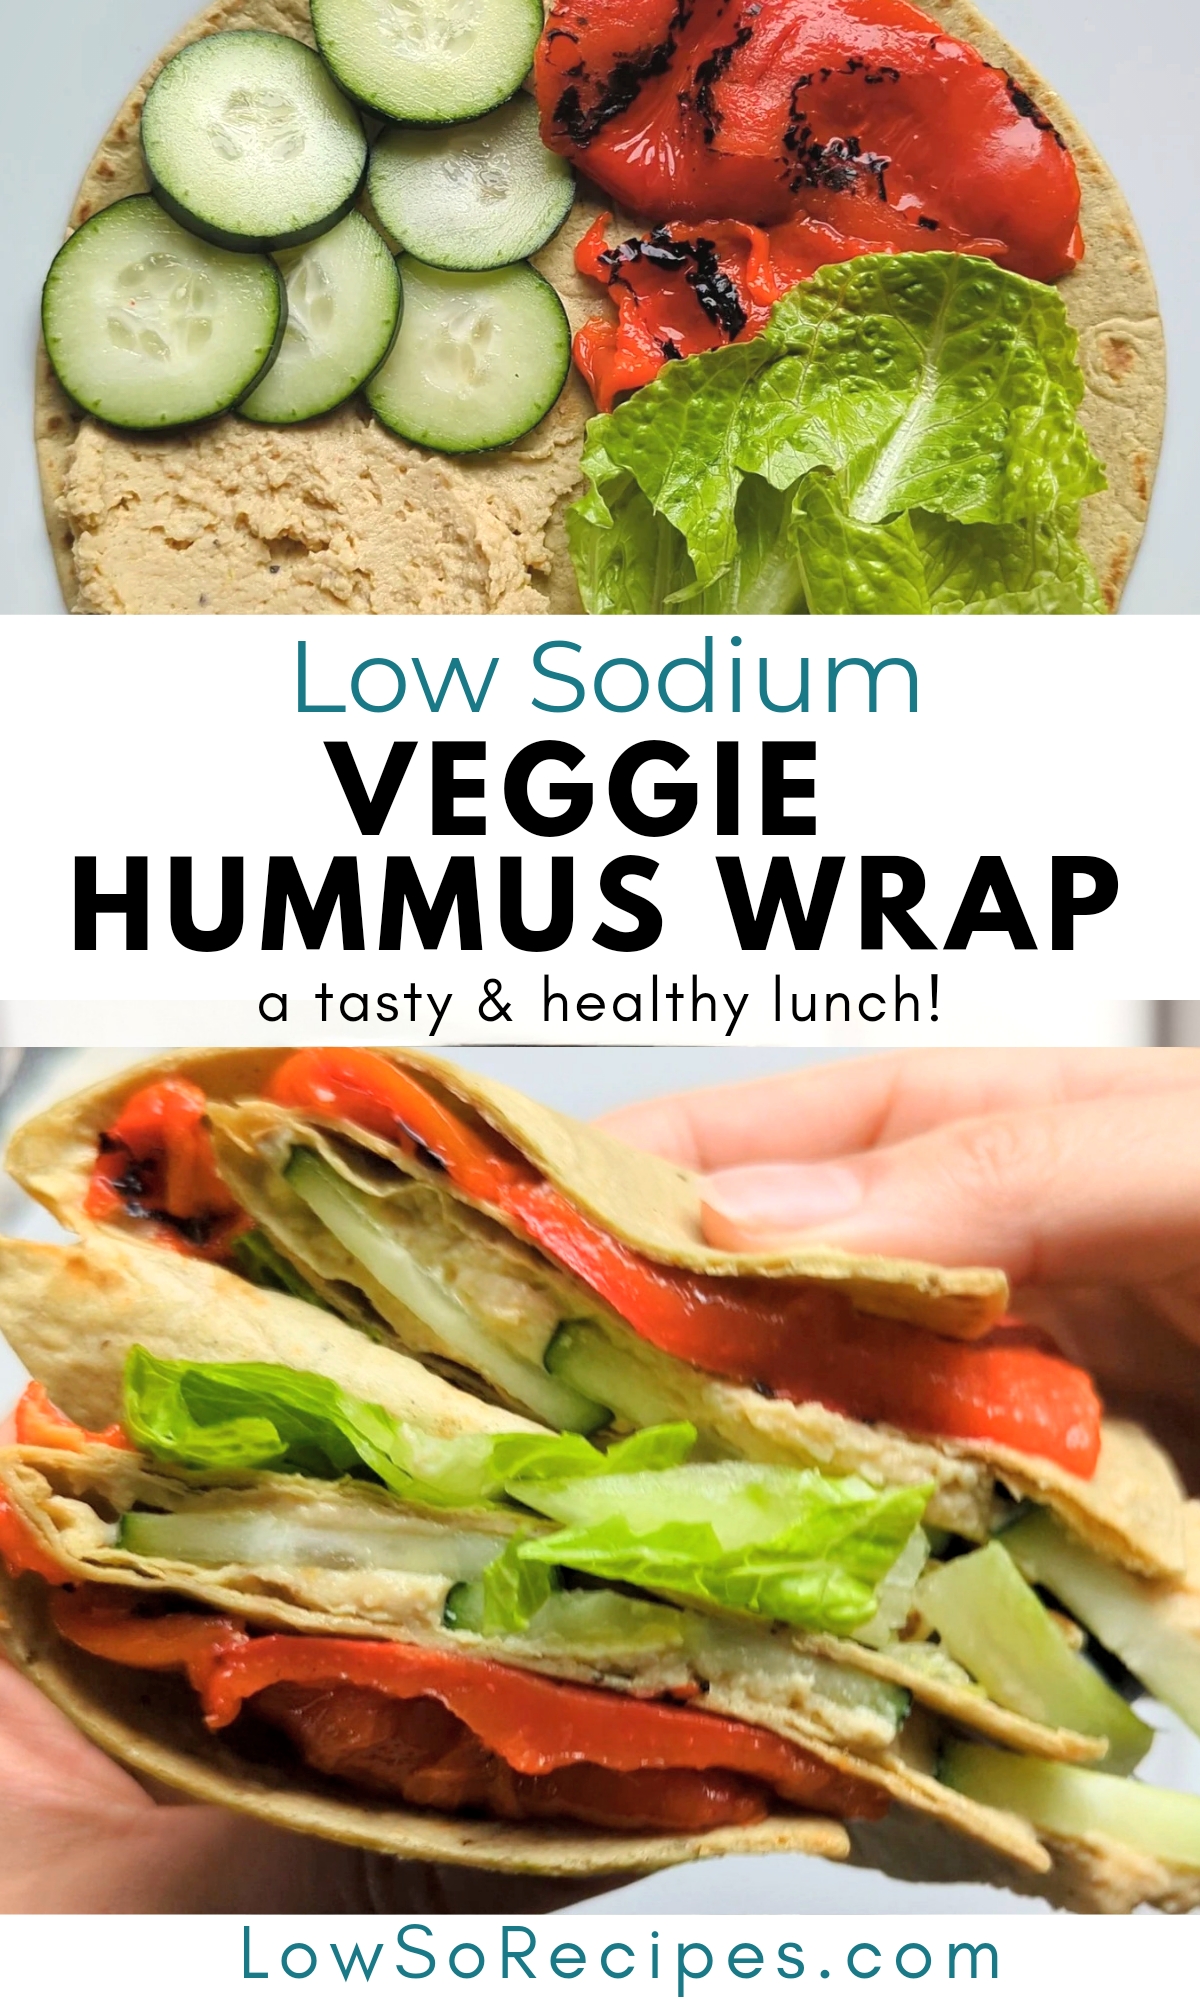 low sodium veggie hummus wrap recipe a tasty and easy lunch idea with no salt added